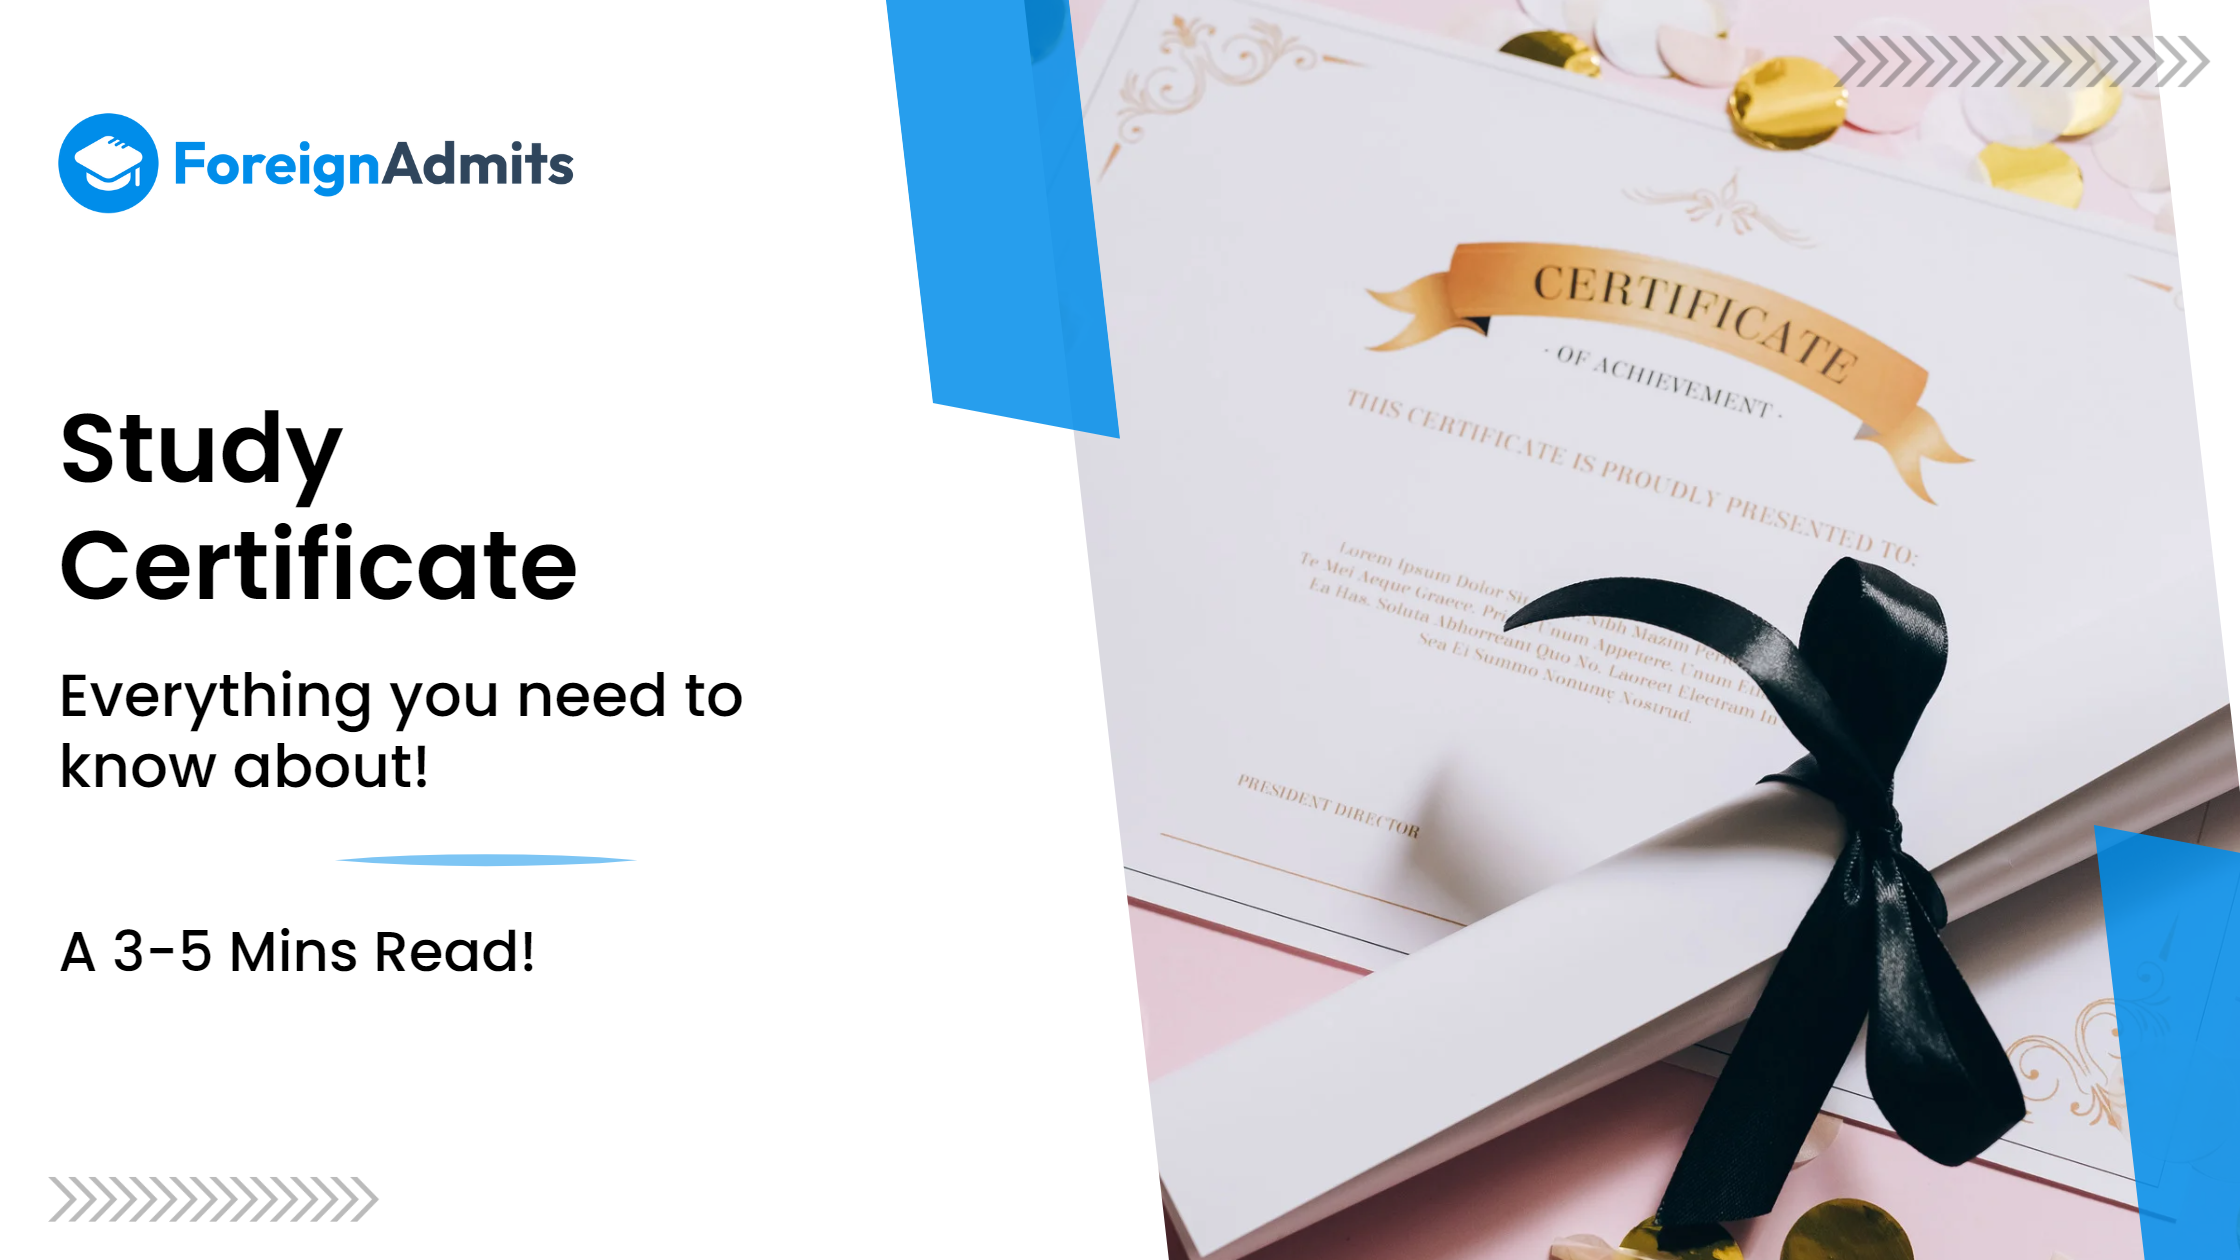 Study Certificate: Everything You Need to Know About It